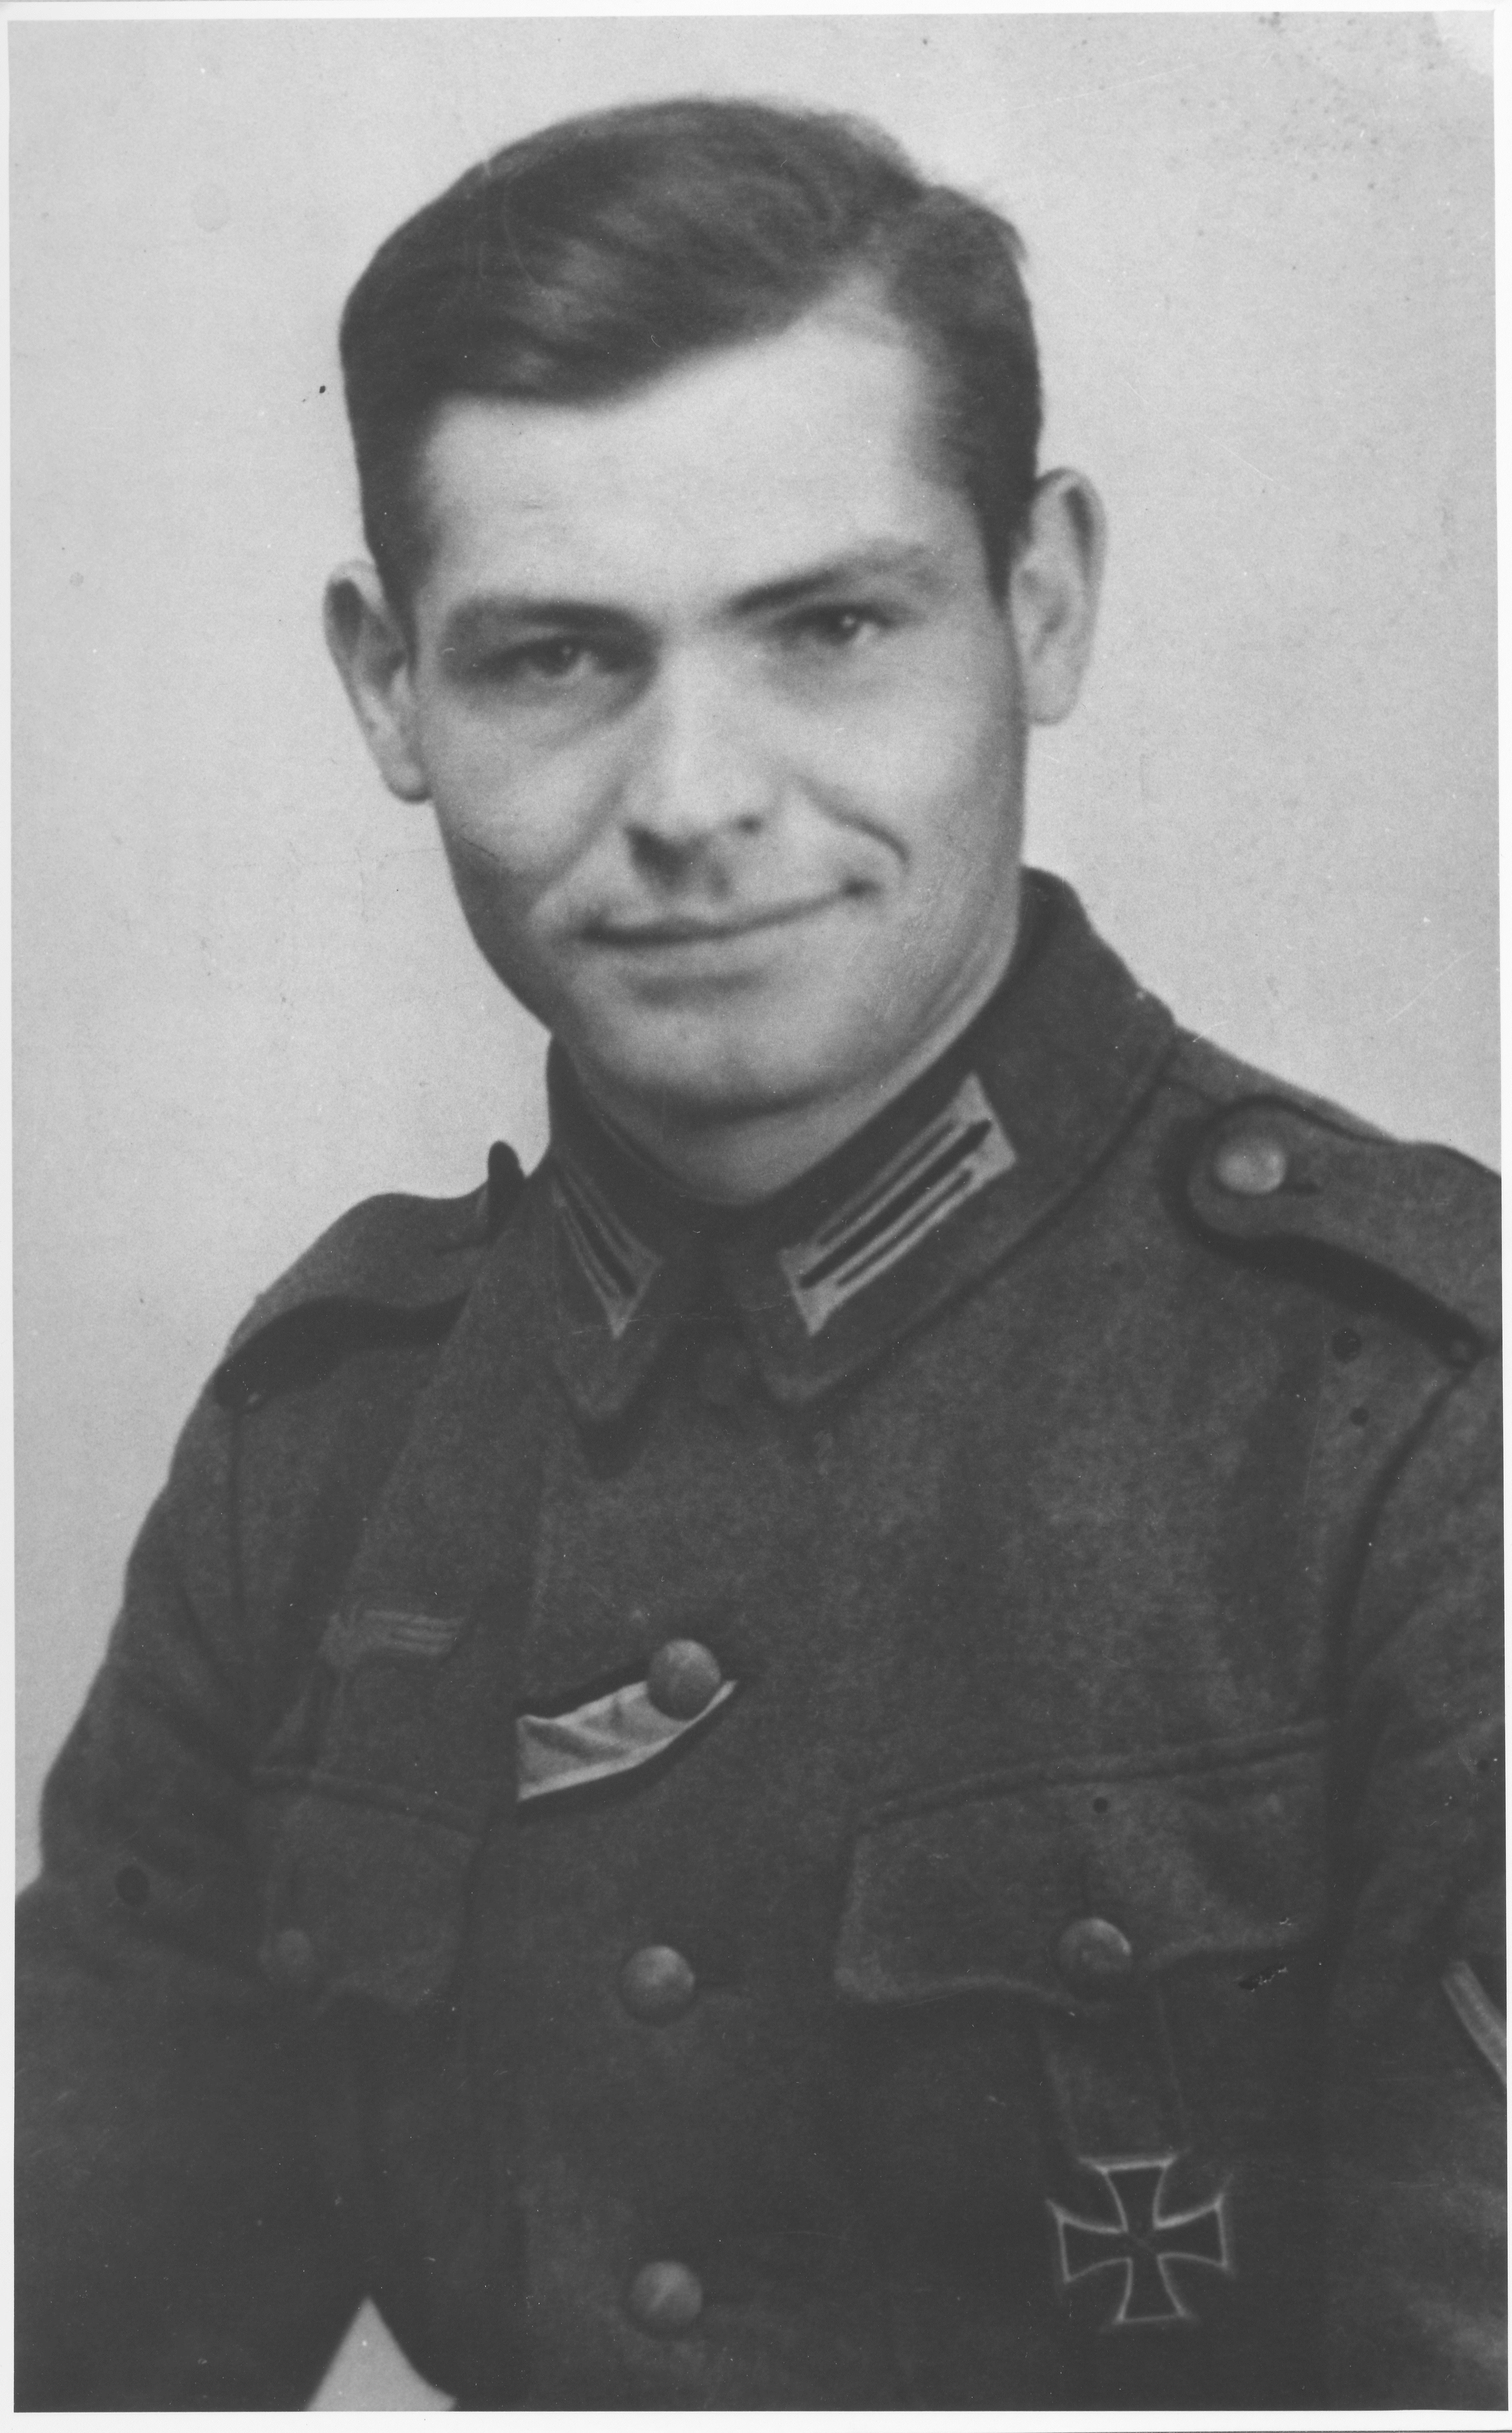 20 year old Martin with iron crosses